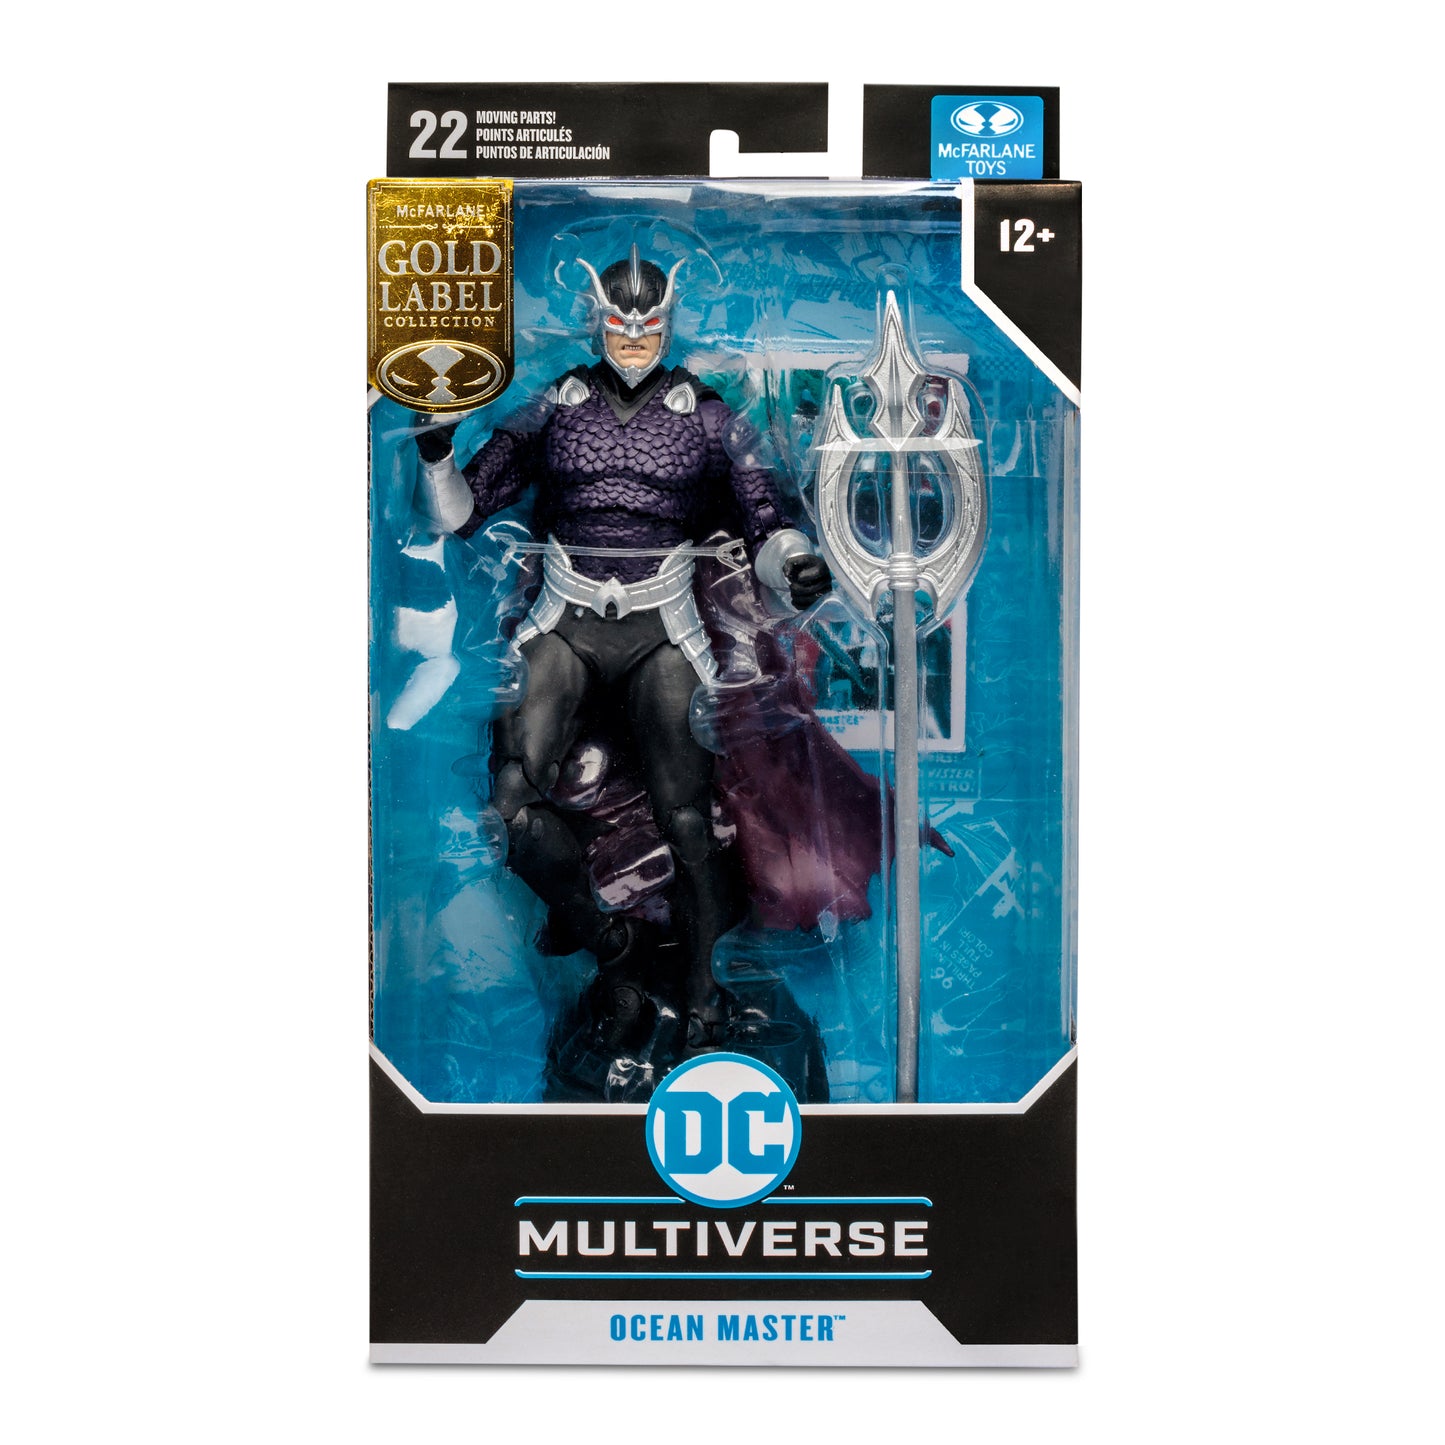 DC Multiverse Ocean Master Gold Label 7 Inch Action Figure Toy